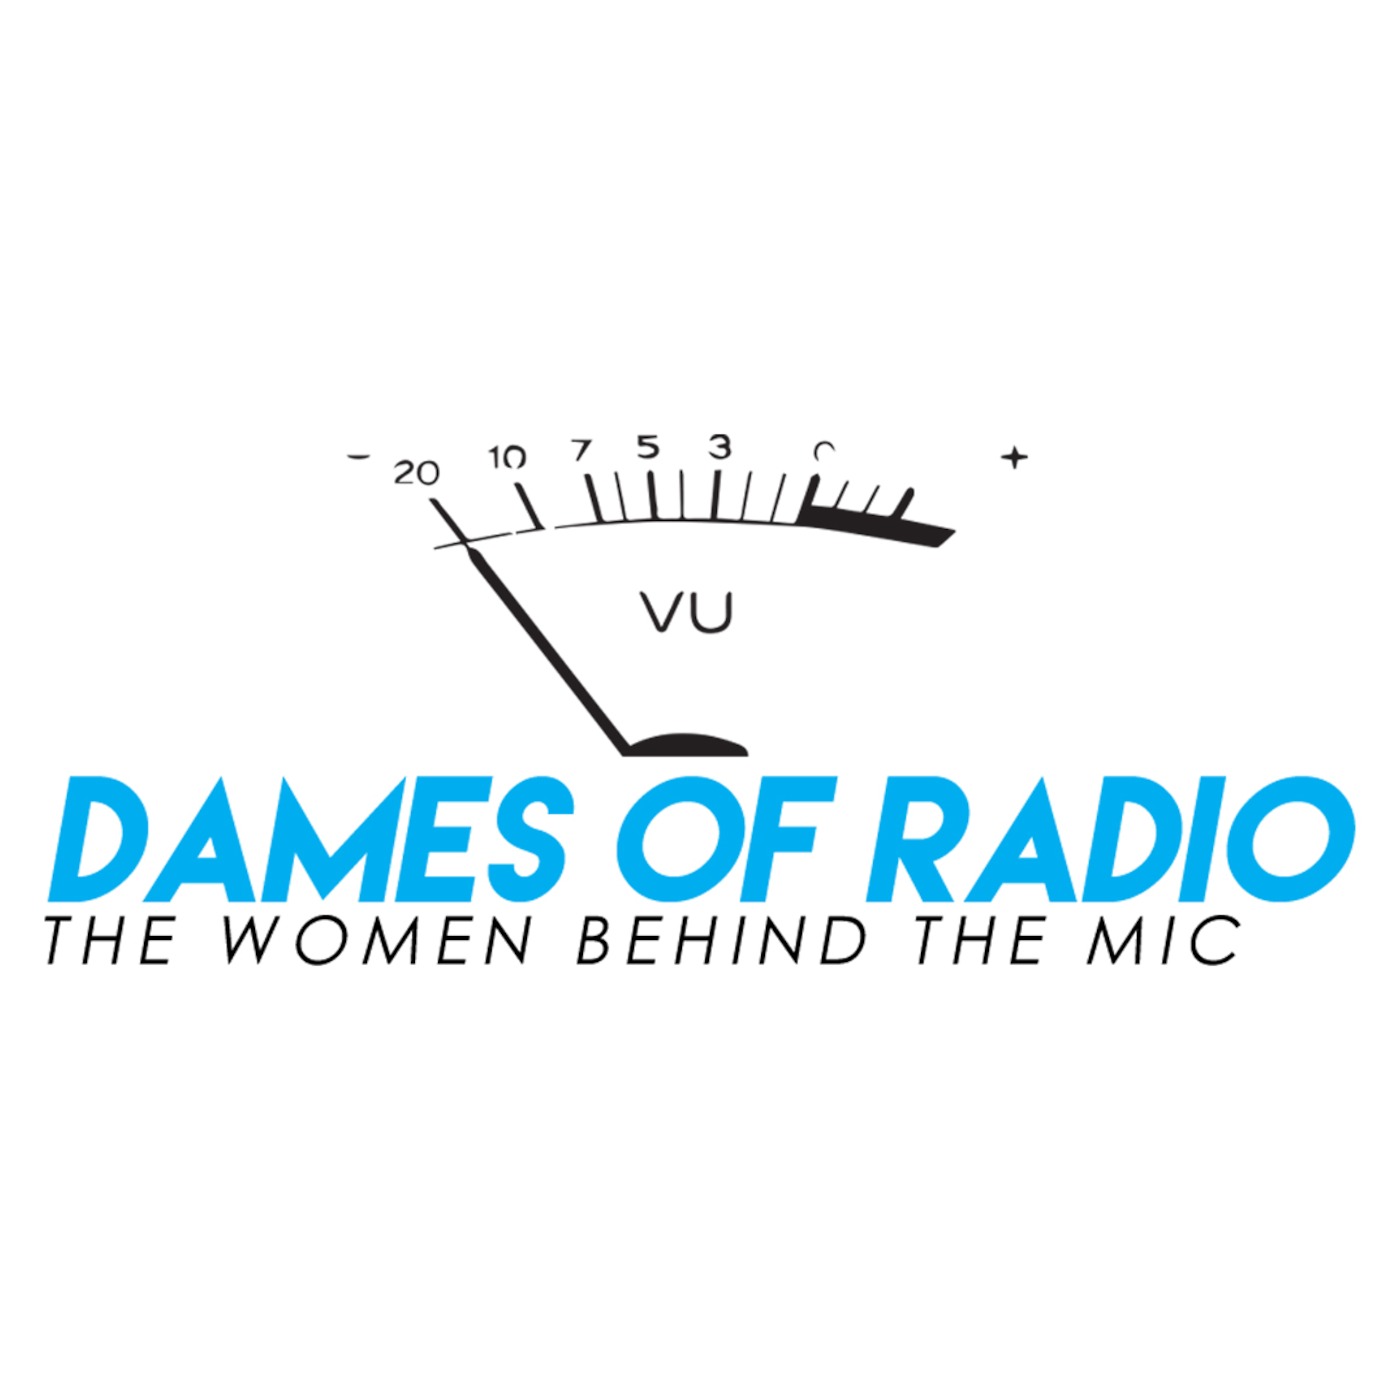 Dames of Radio: The Women Behind the Mic